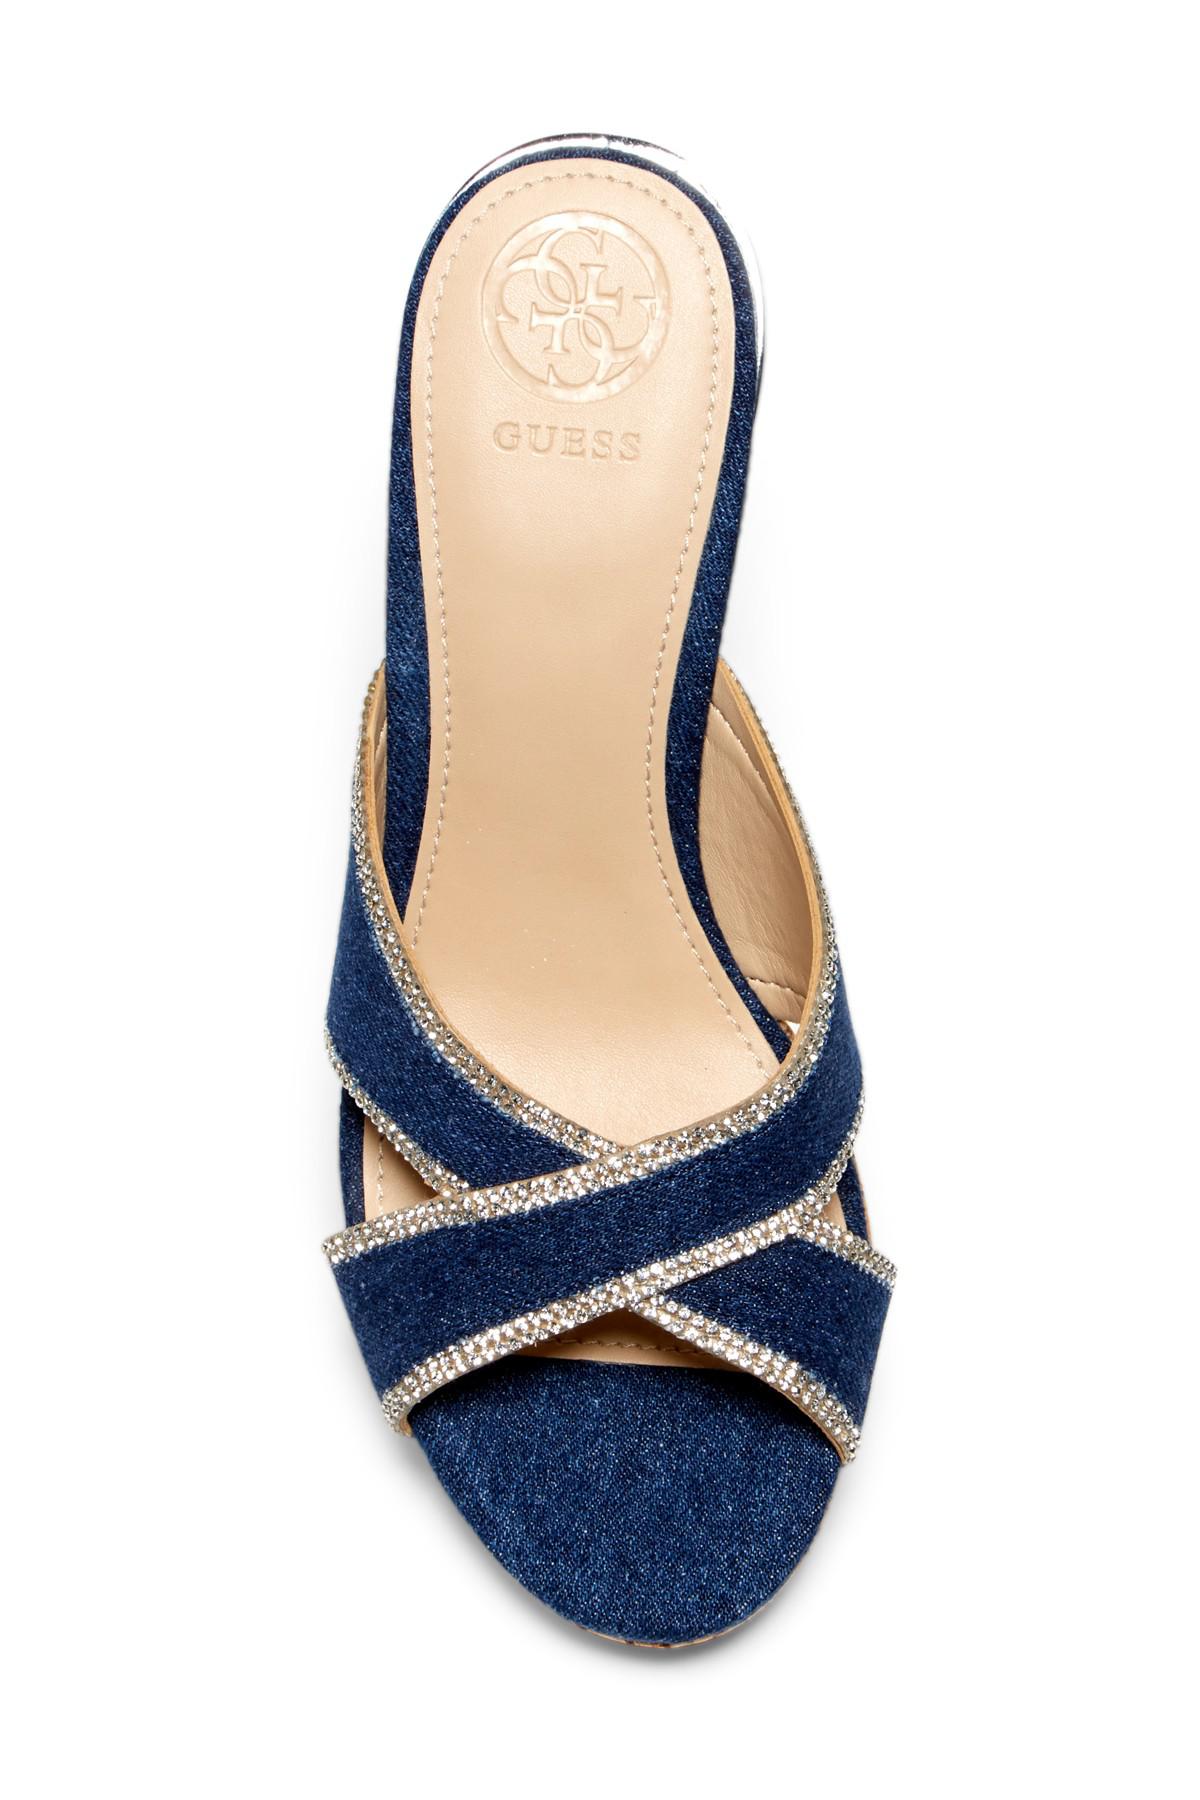 Lyst - Guess Eleonora Wedge Sandals in Blue